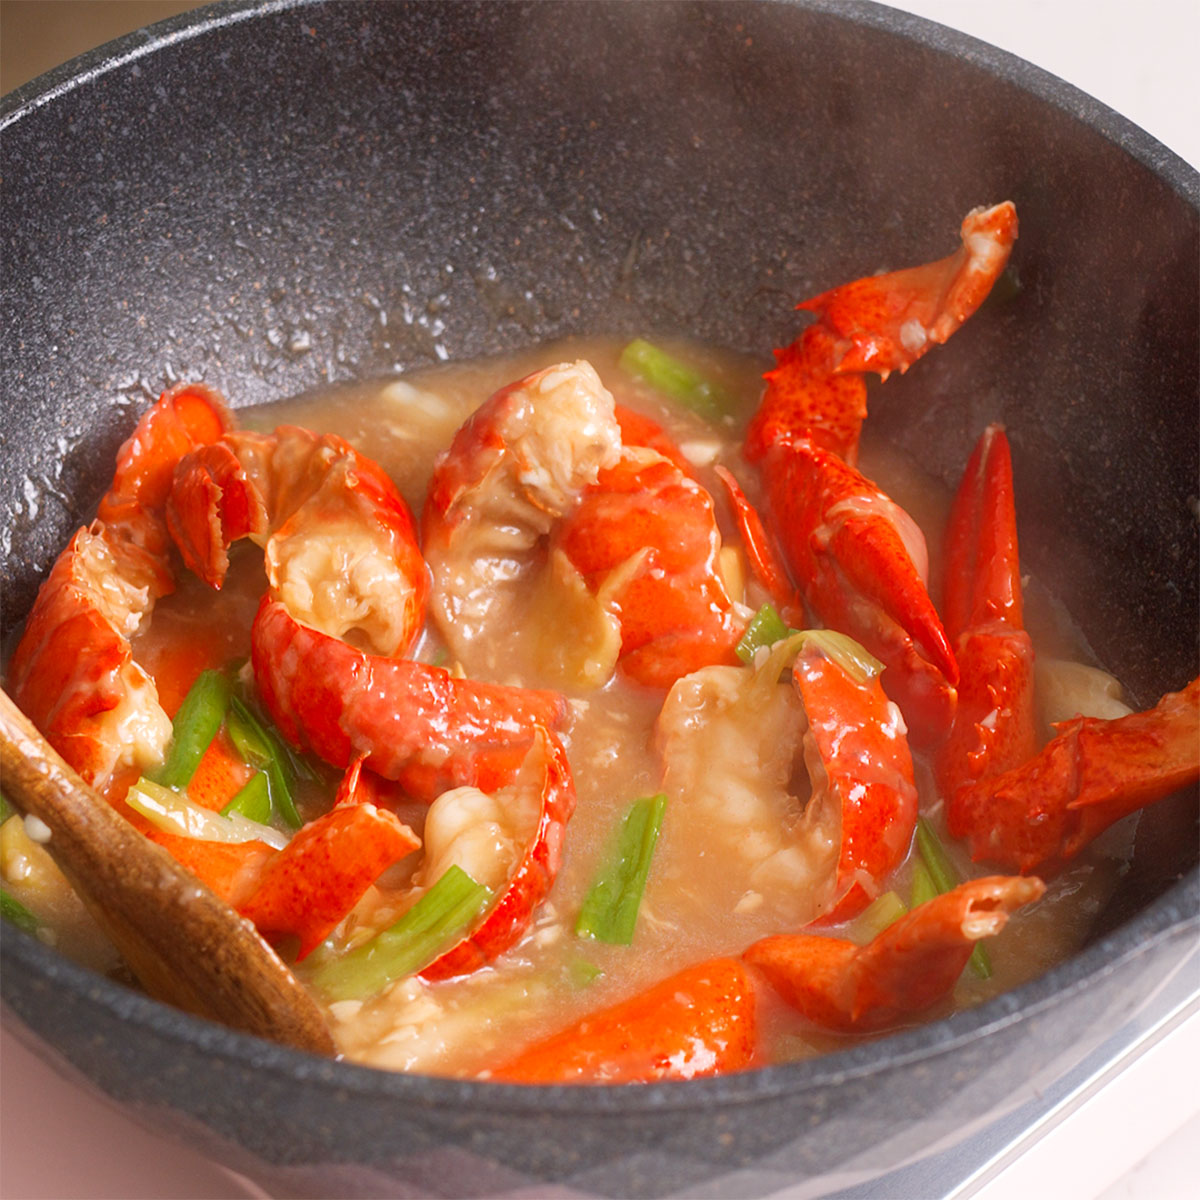 Fried lobster in a sauce after completing cooking for lobster noodles.